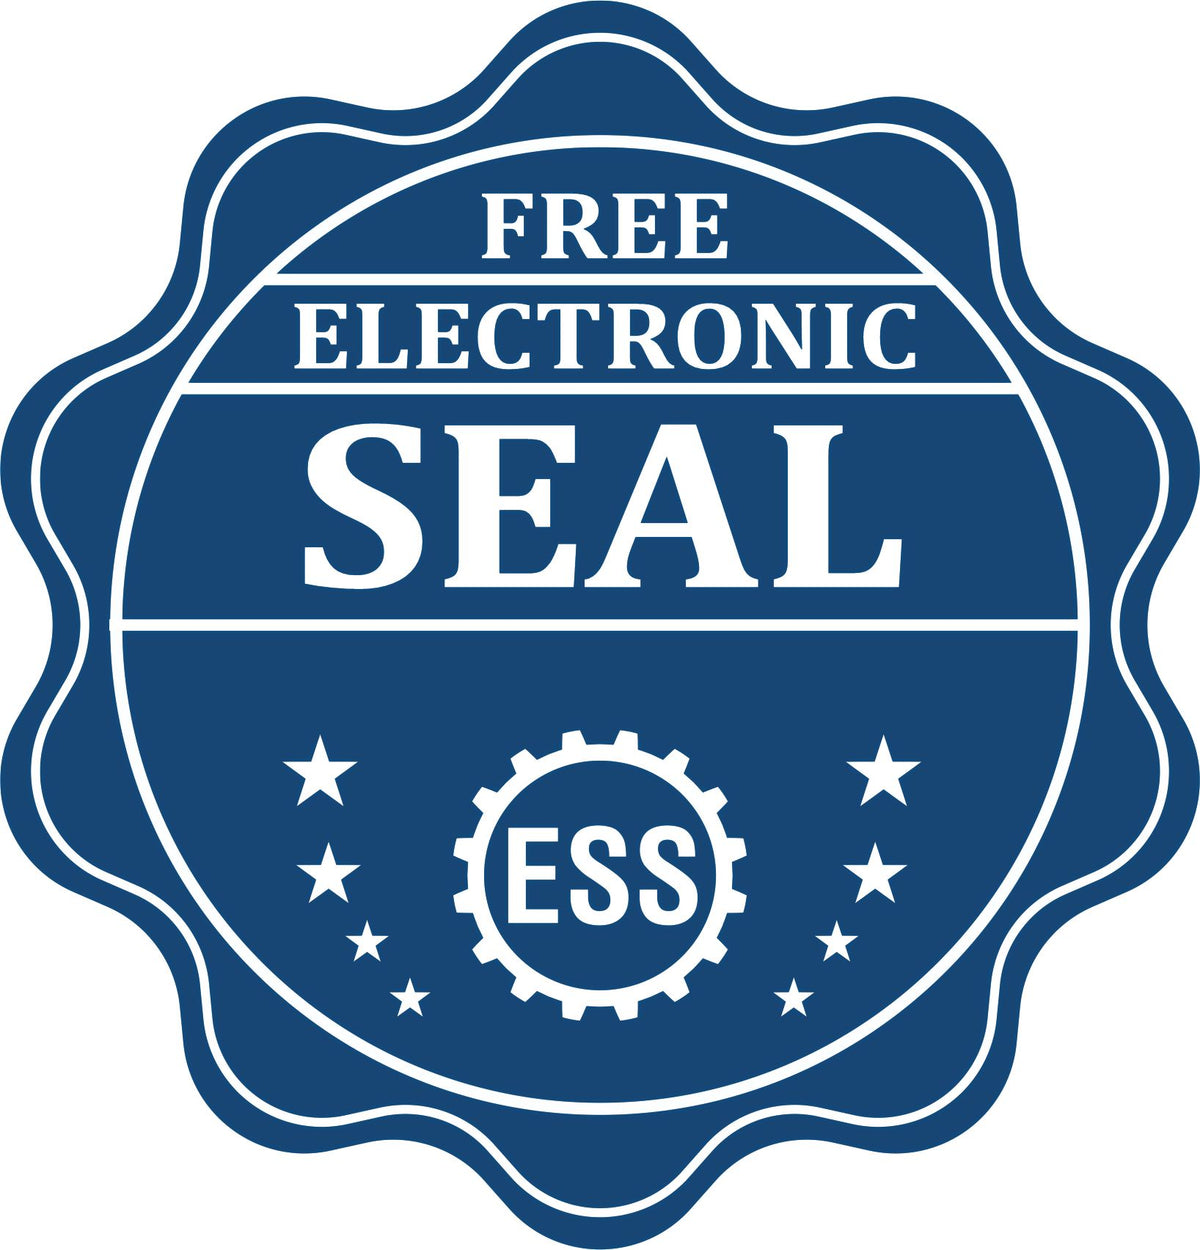 A badge showing a free electronic seal for the Heavy Duty Cast Iron Nevada Geologist Seal Embosser with stars and the ESS gear on the emblem.